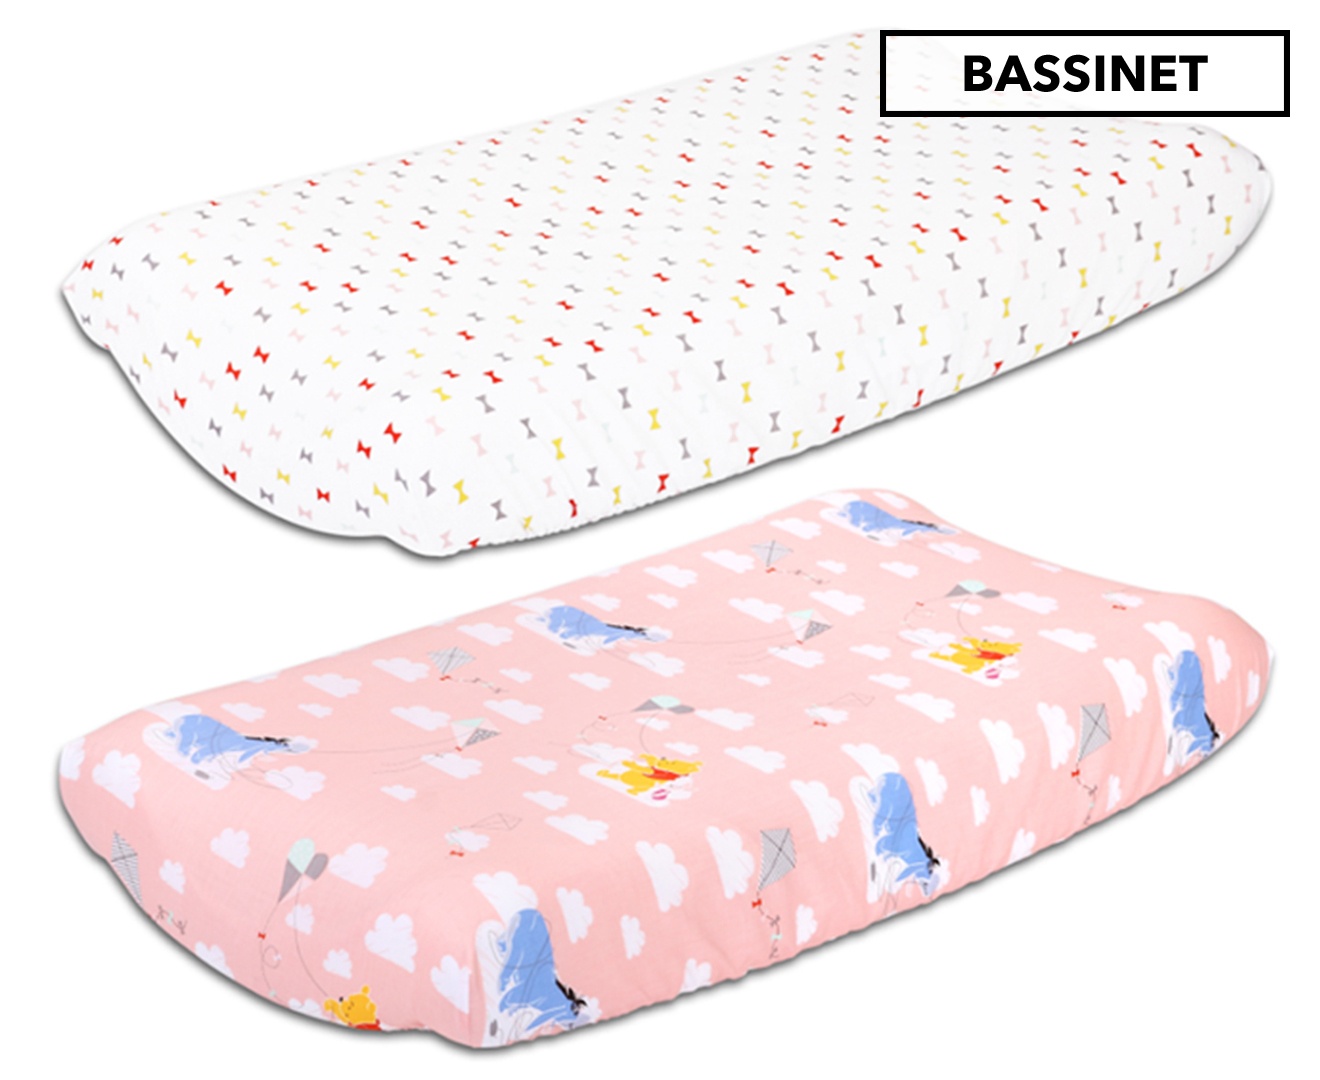 31 inches by 20 inches bassinet mattress